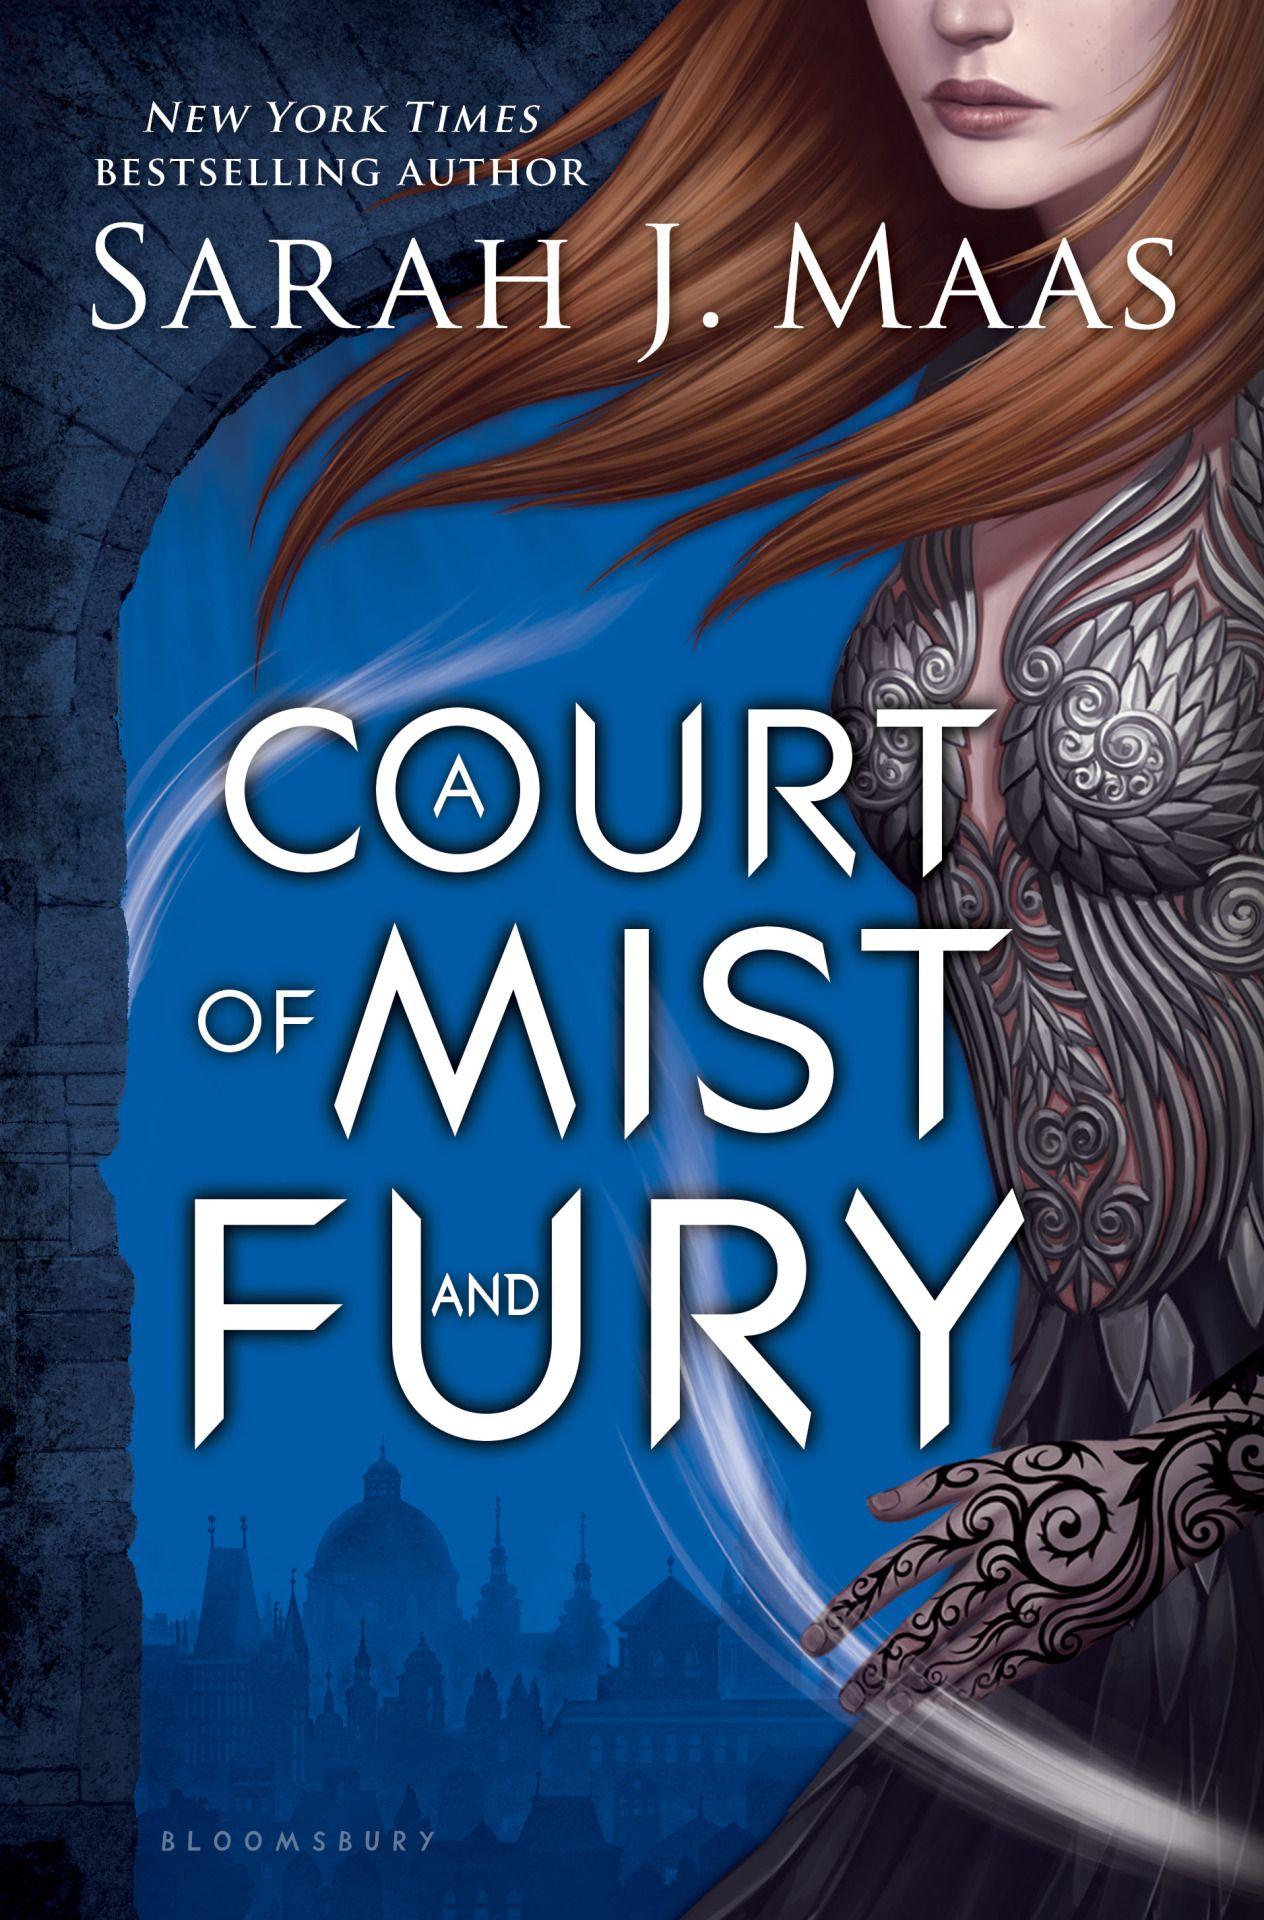 The Thousandth Floor The Us Cover For A Court Of Mist And Fury Out.